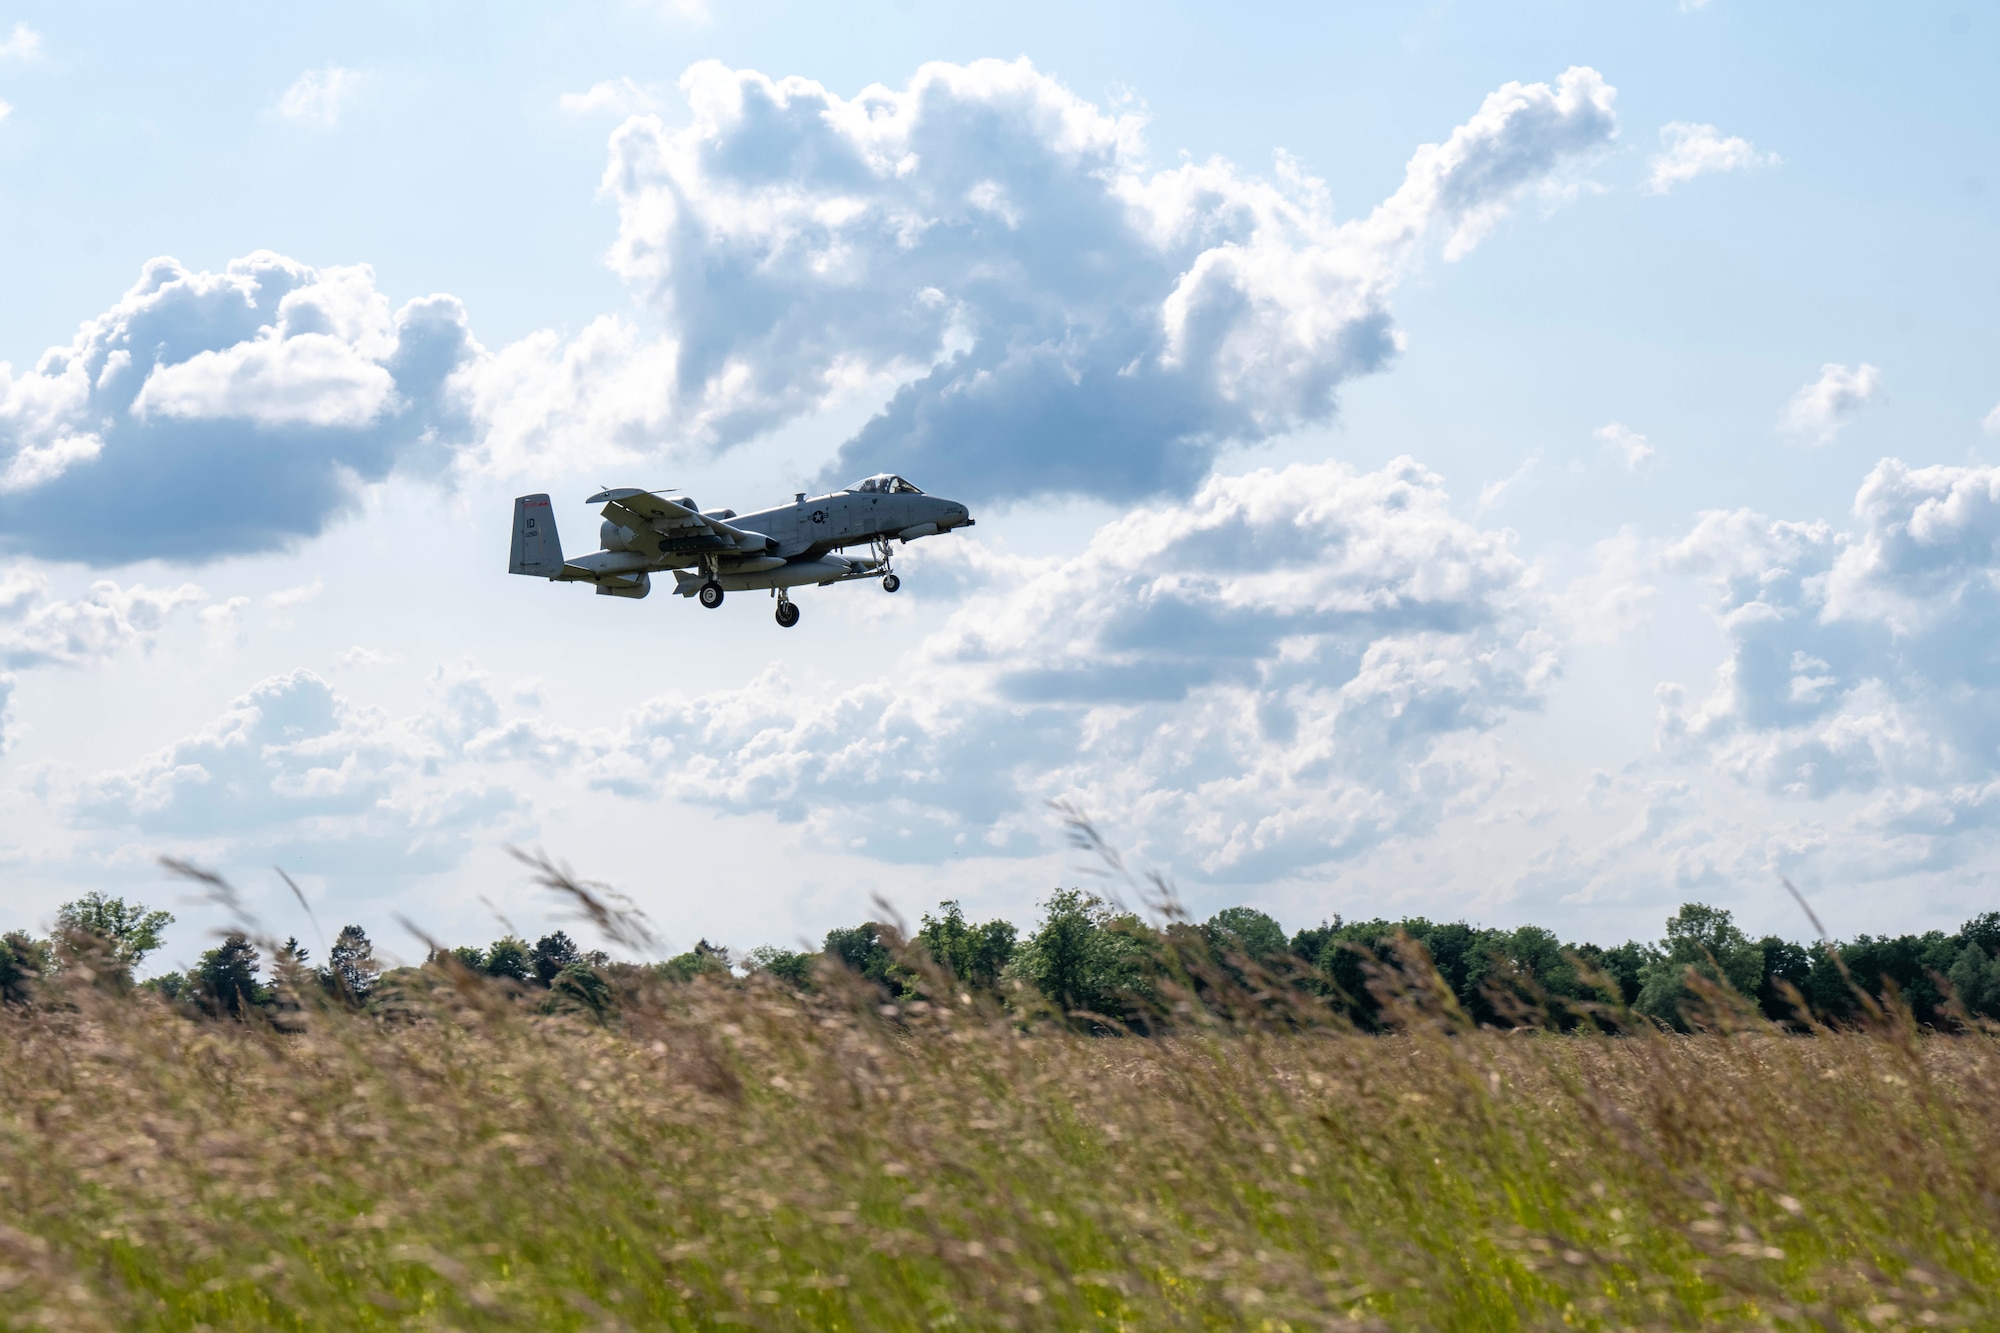 A U.S. Air Force A-10 Thunderbolt II assigned to the 124th Fighter Wing, Idaho National Guard arrives at Lechfeld Air Base, Germany, in preparation for exercise Air Defender 2023 (AD23), June 6, 2023. AD23 integrates both U.S. and allied air-power to defend shared values, while leveraging and strengthening vital partnerships to deter aggression around the world. (U.S. Air National Guard photo by Staff Sgt. Joseph R. Morgan)